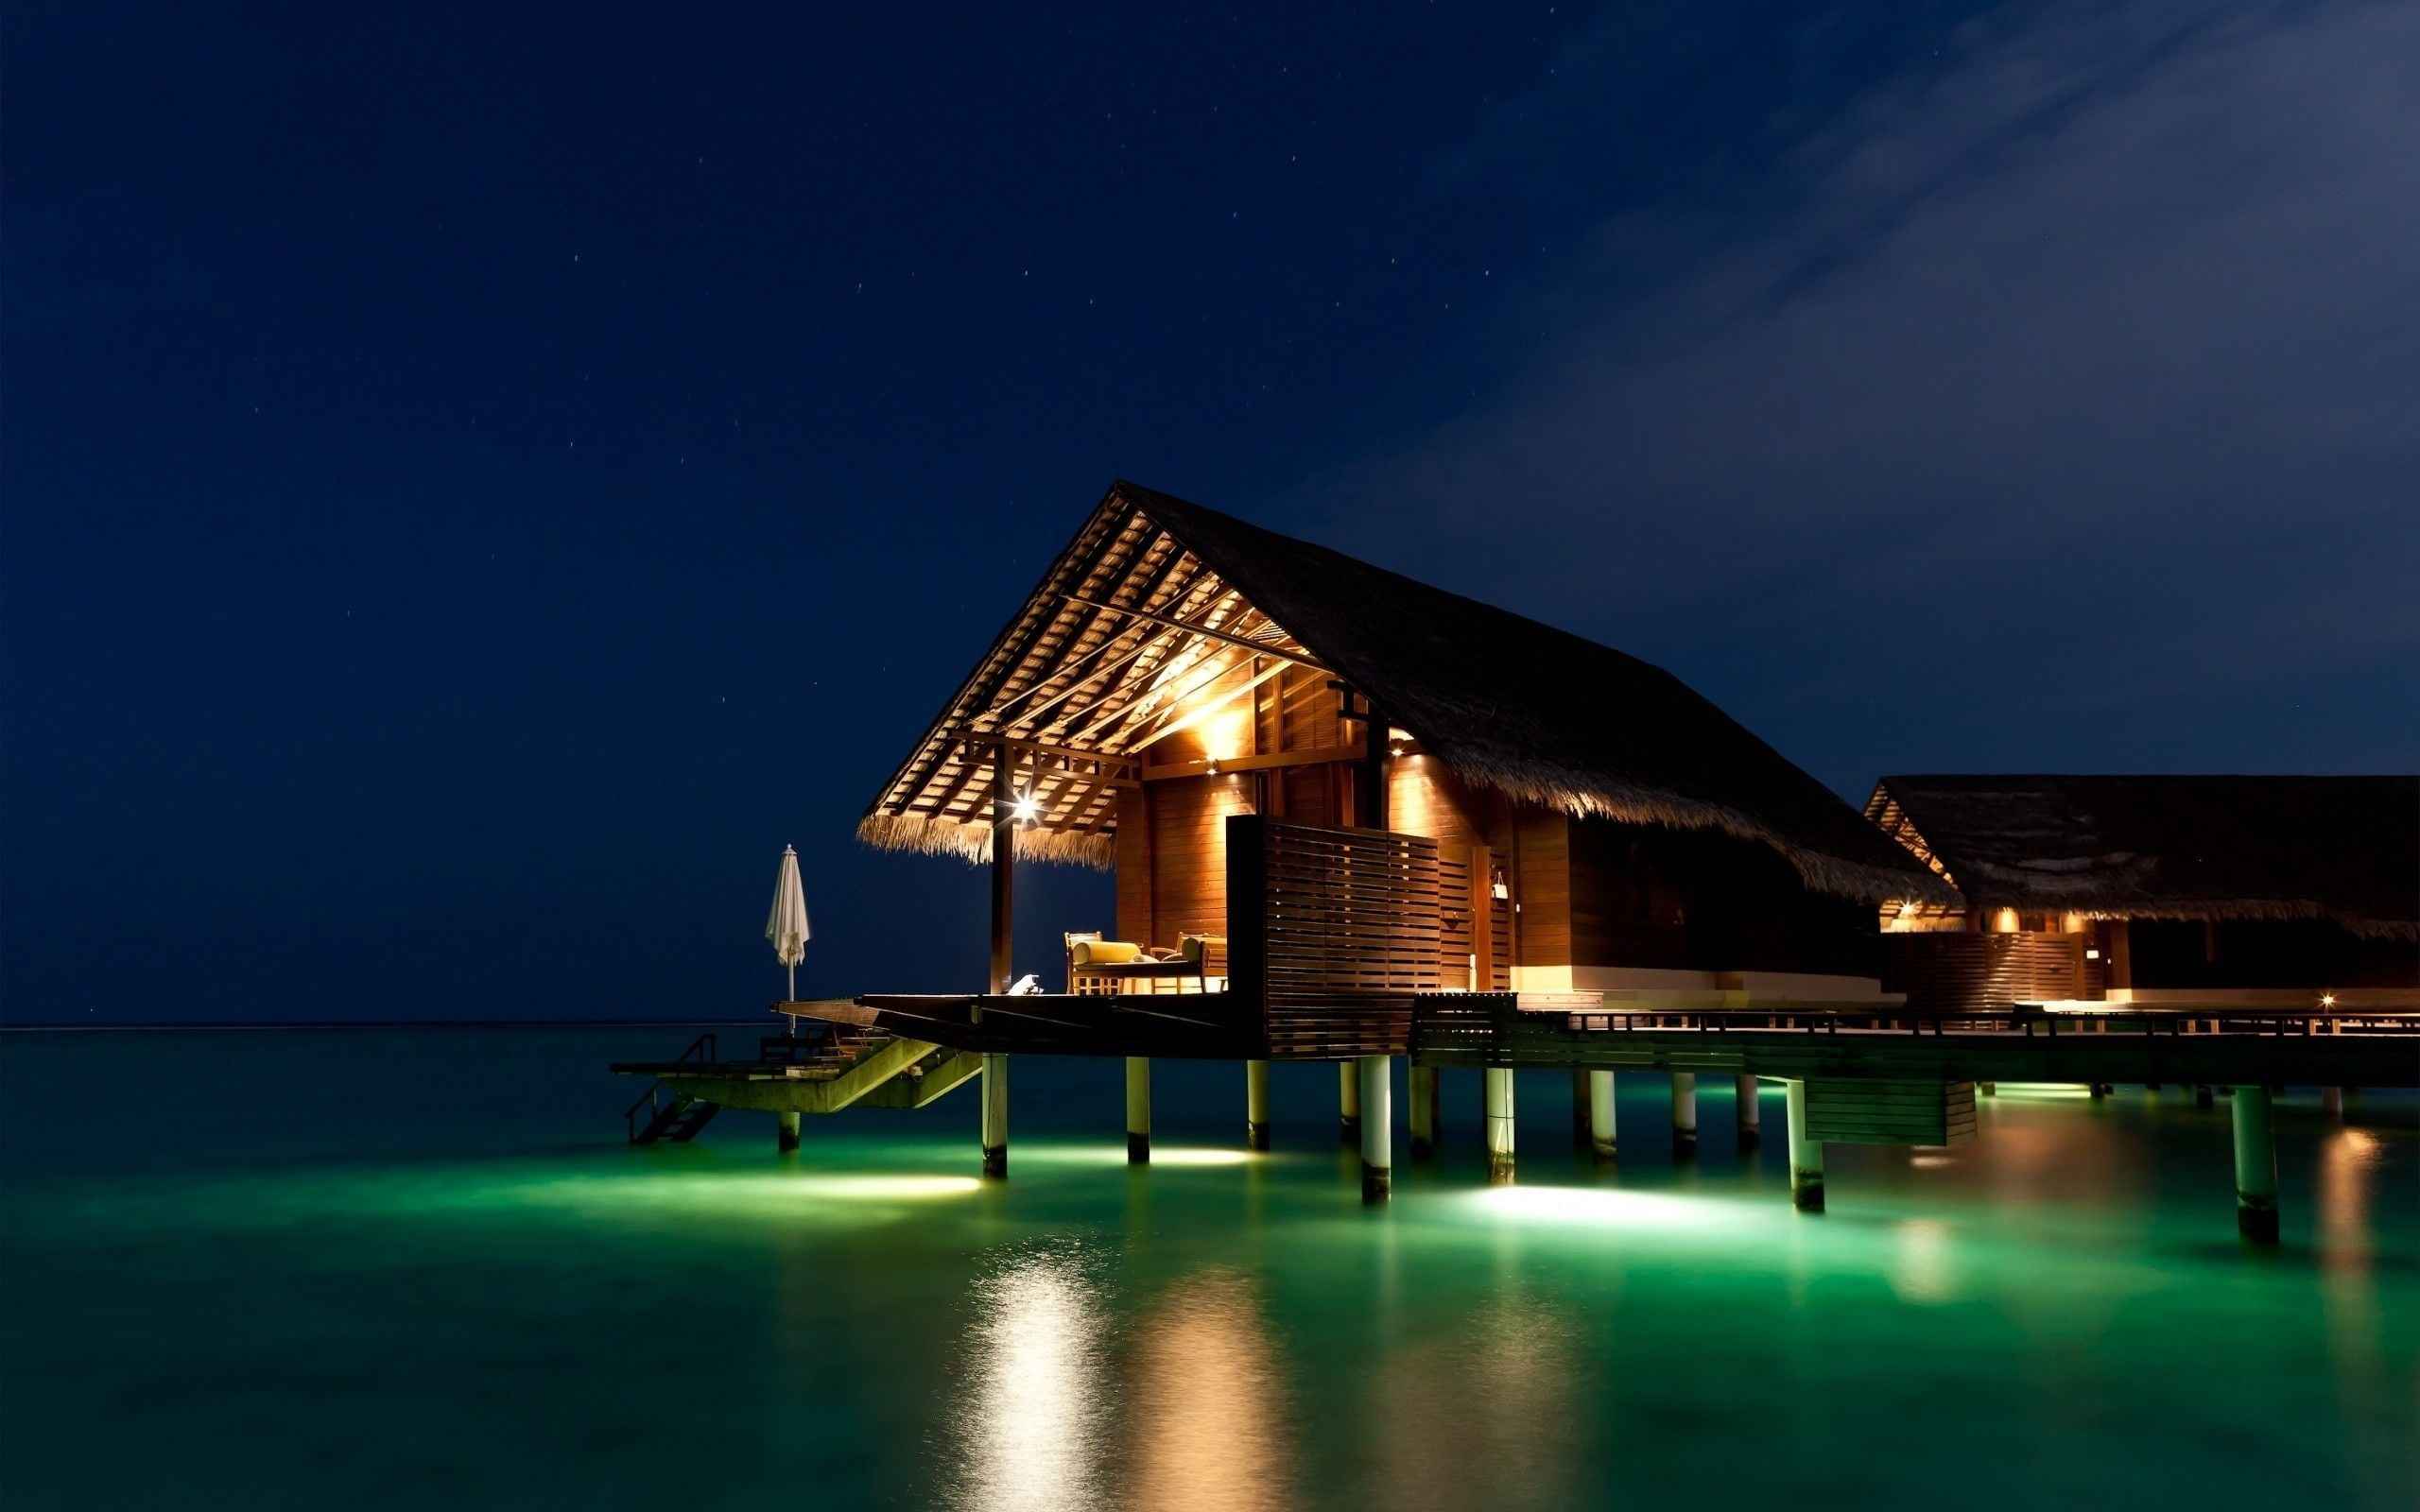 brown wooden hut on water with lights